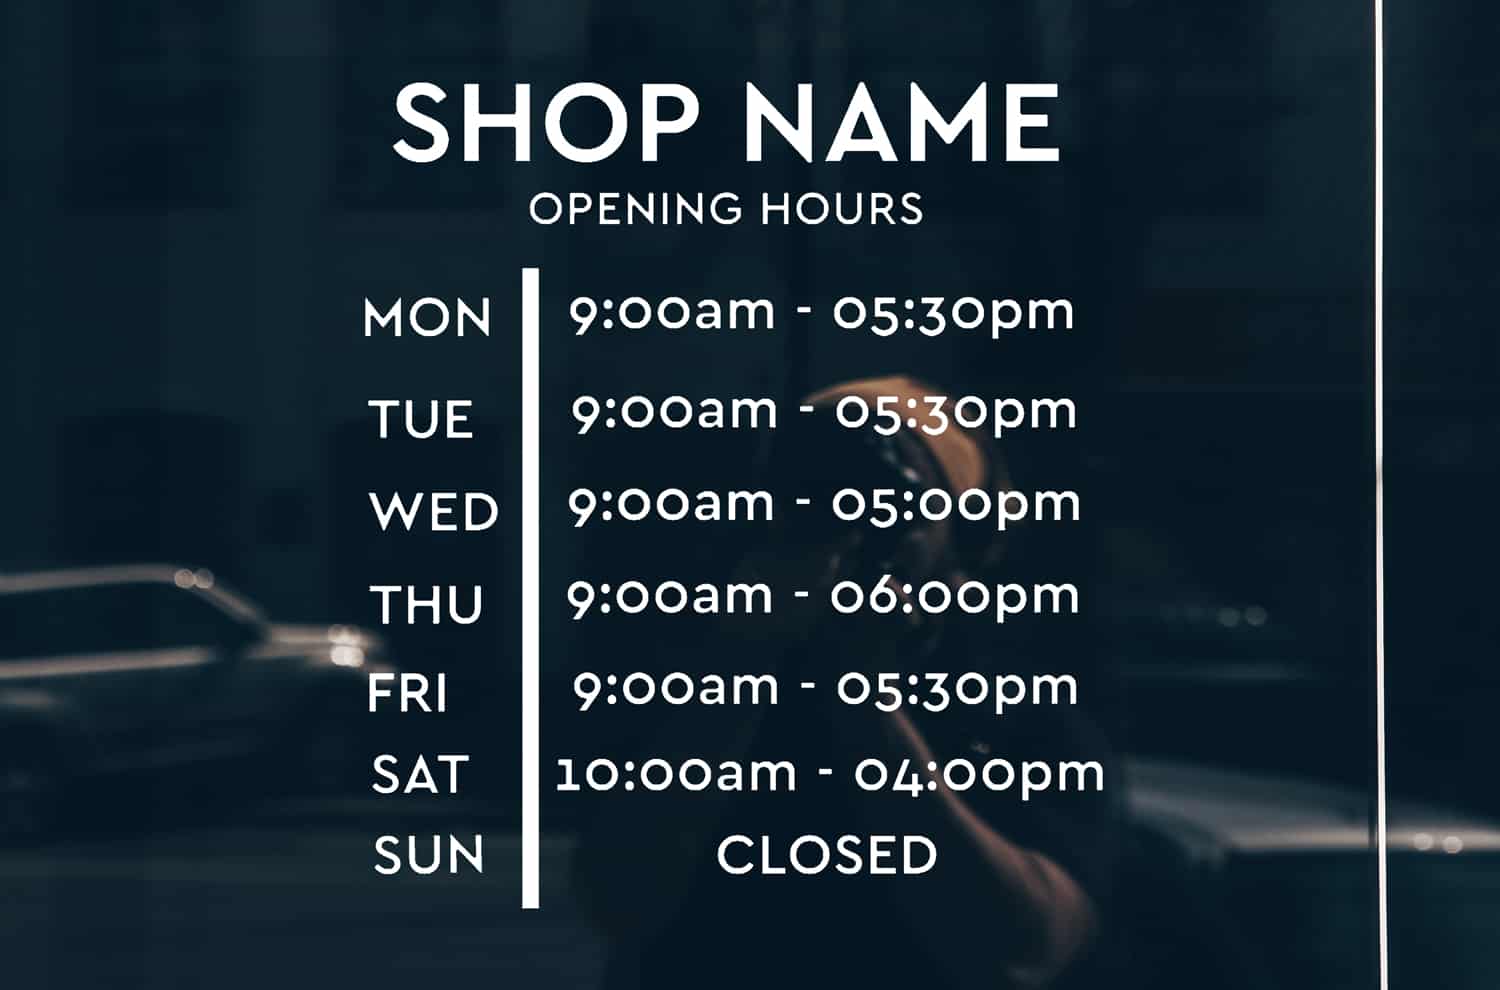 Opening hours signs